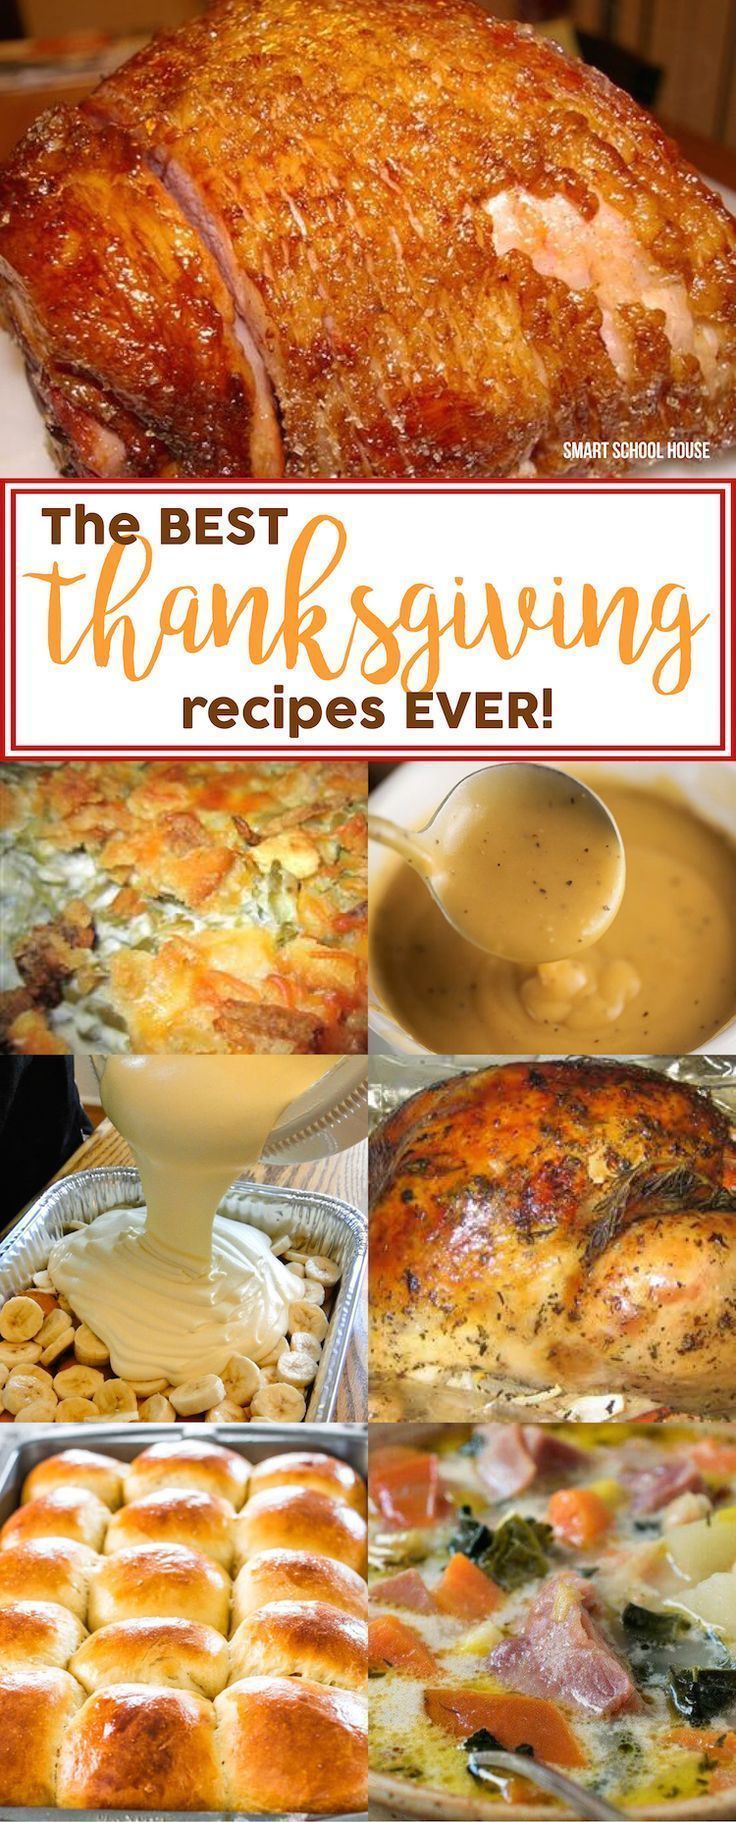 The BEST Thanksgiving Recipes EVER -   20 thanksgiving recipes mashed
 ideas